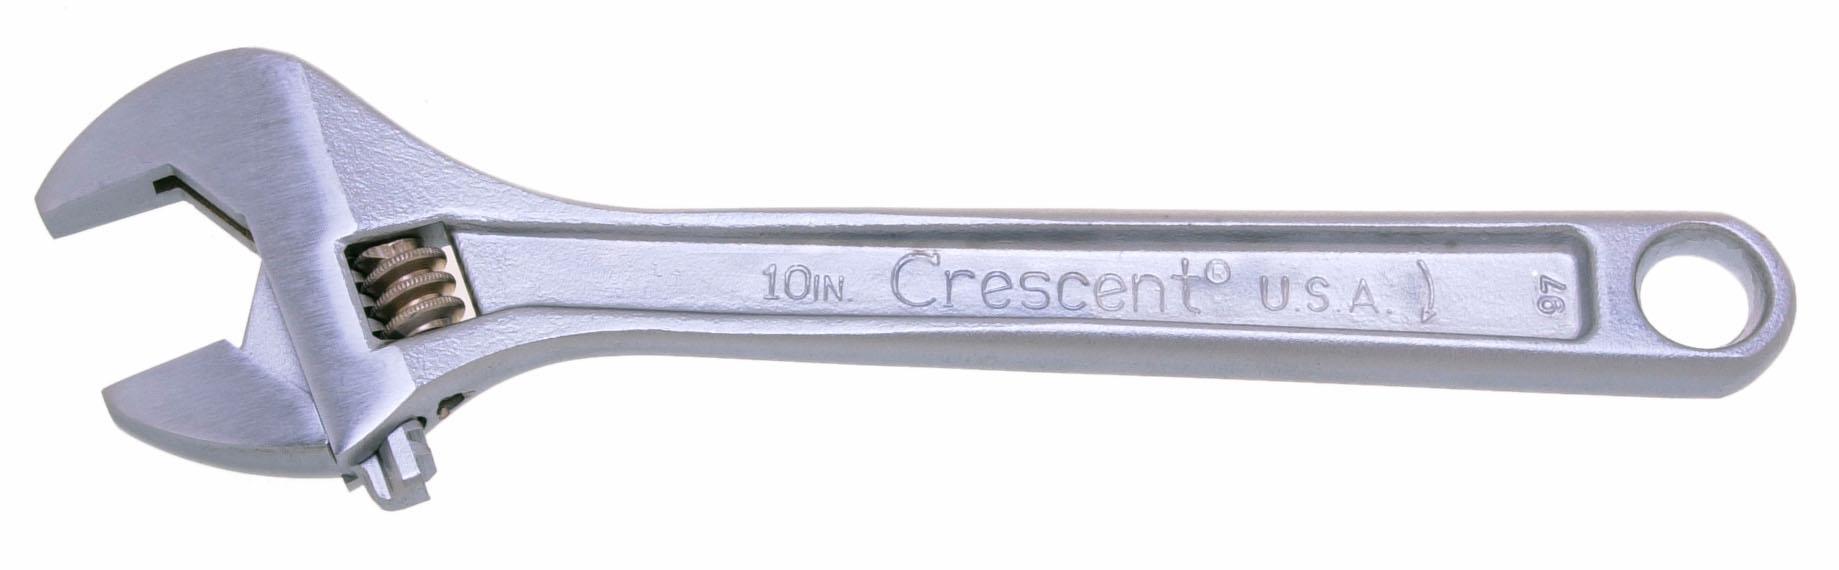 CRESCENT 10" ADJUSTABLE WRENCH MADE IN U.S.A.